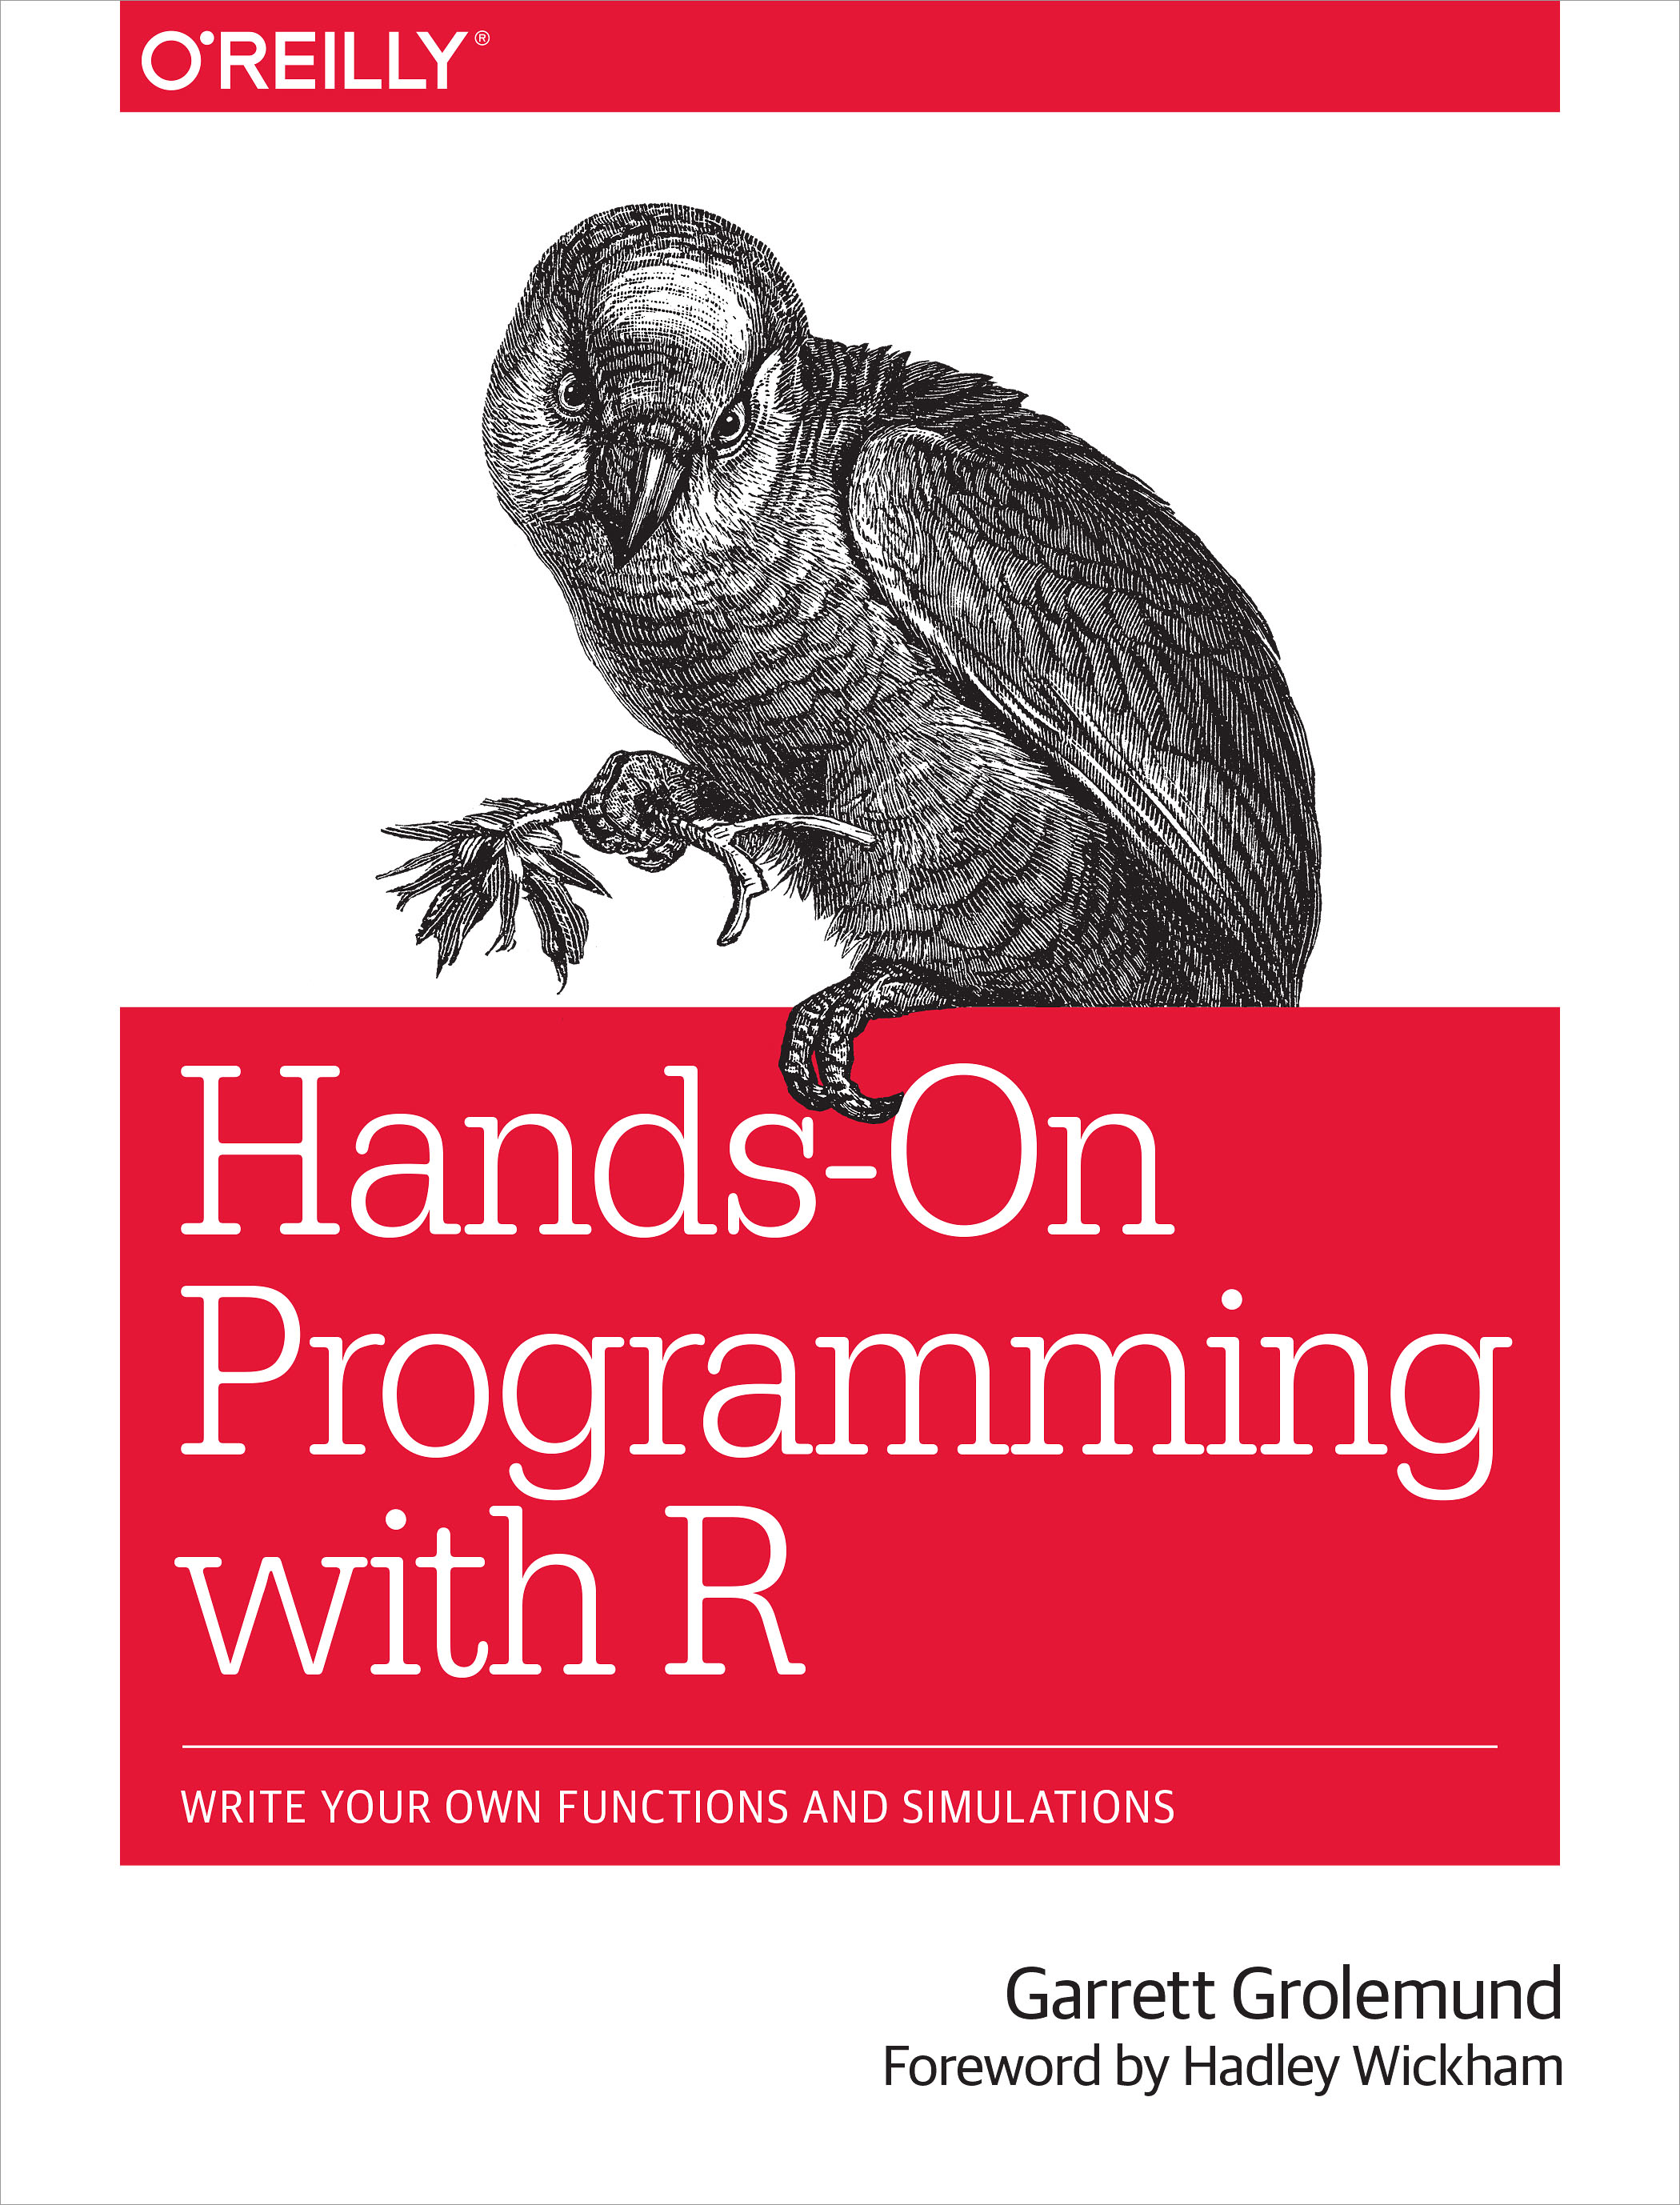 The Hands-On Programming with R book cover